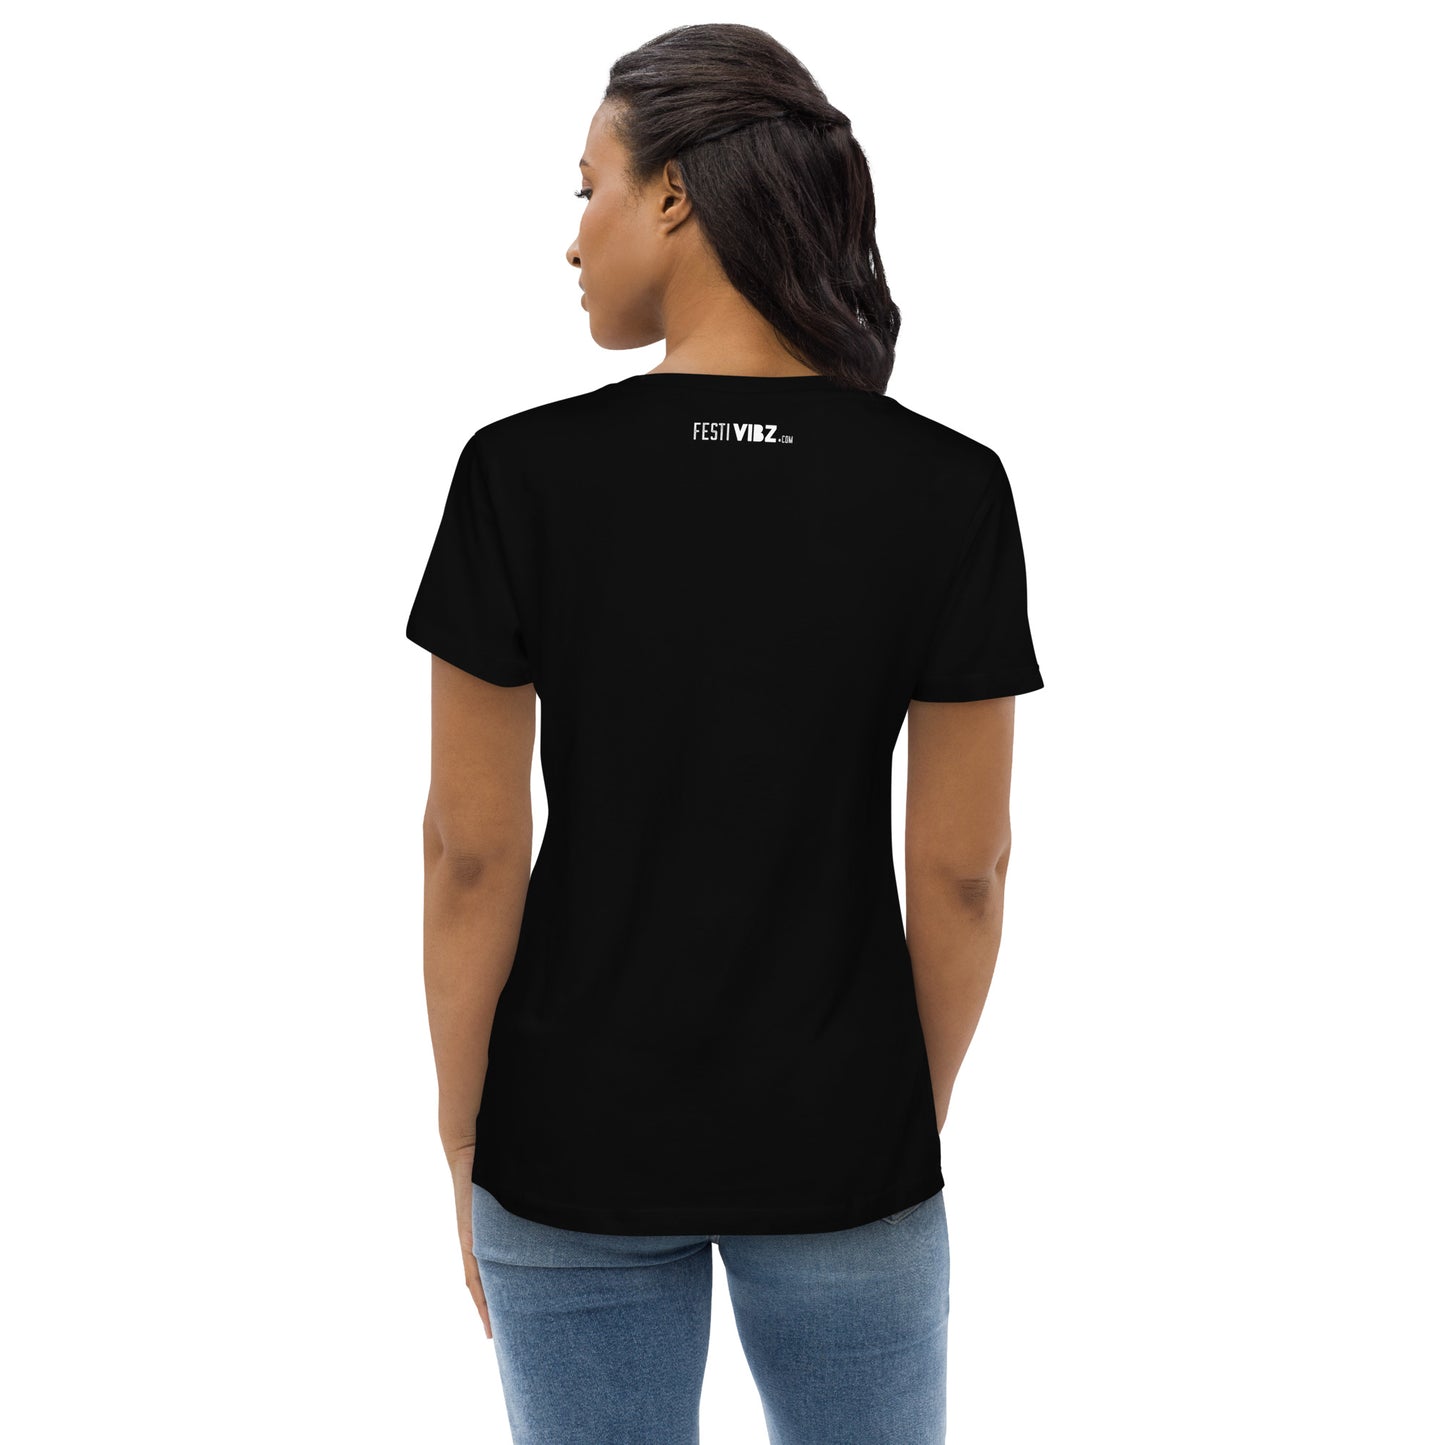 To The Rave - Women's Fitted T-Shirt